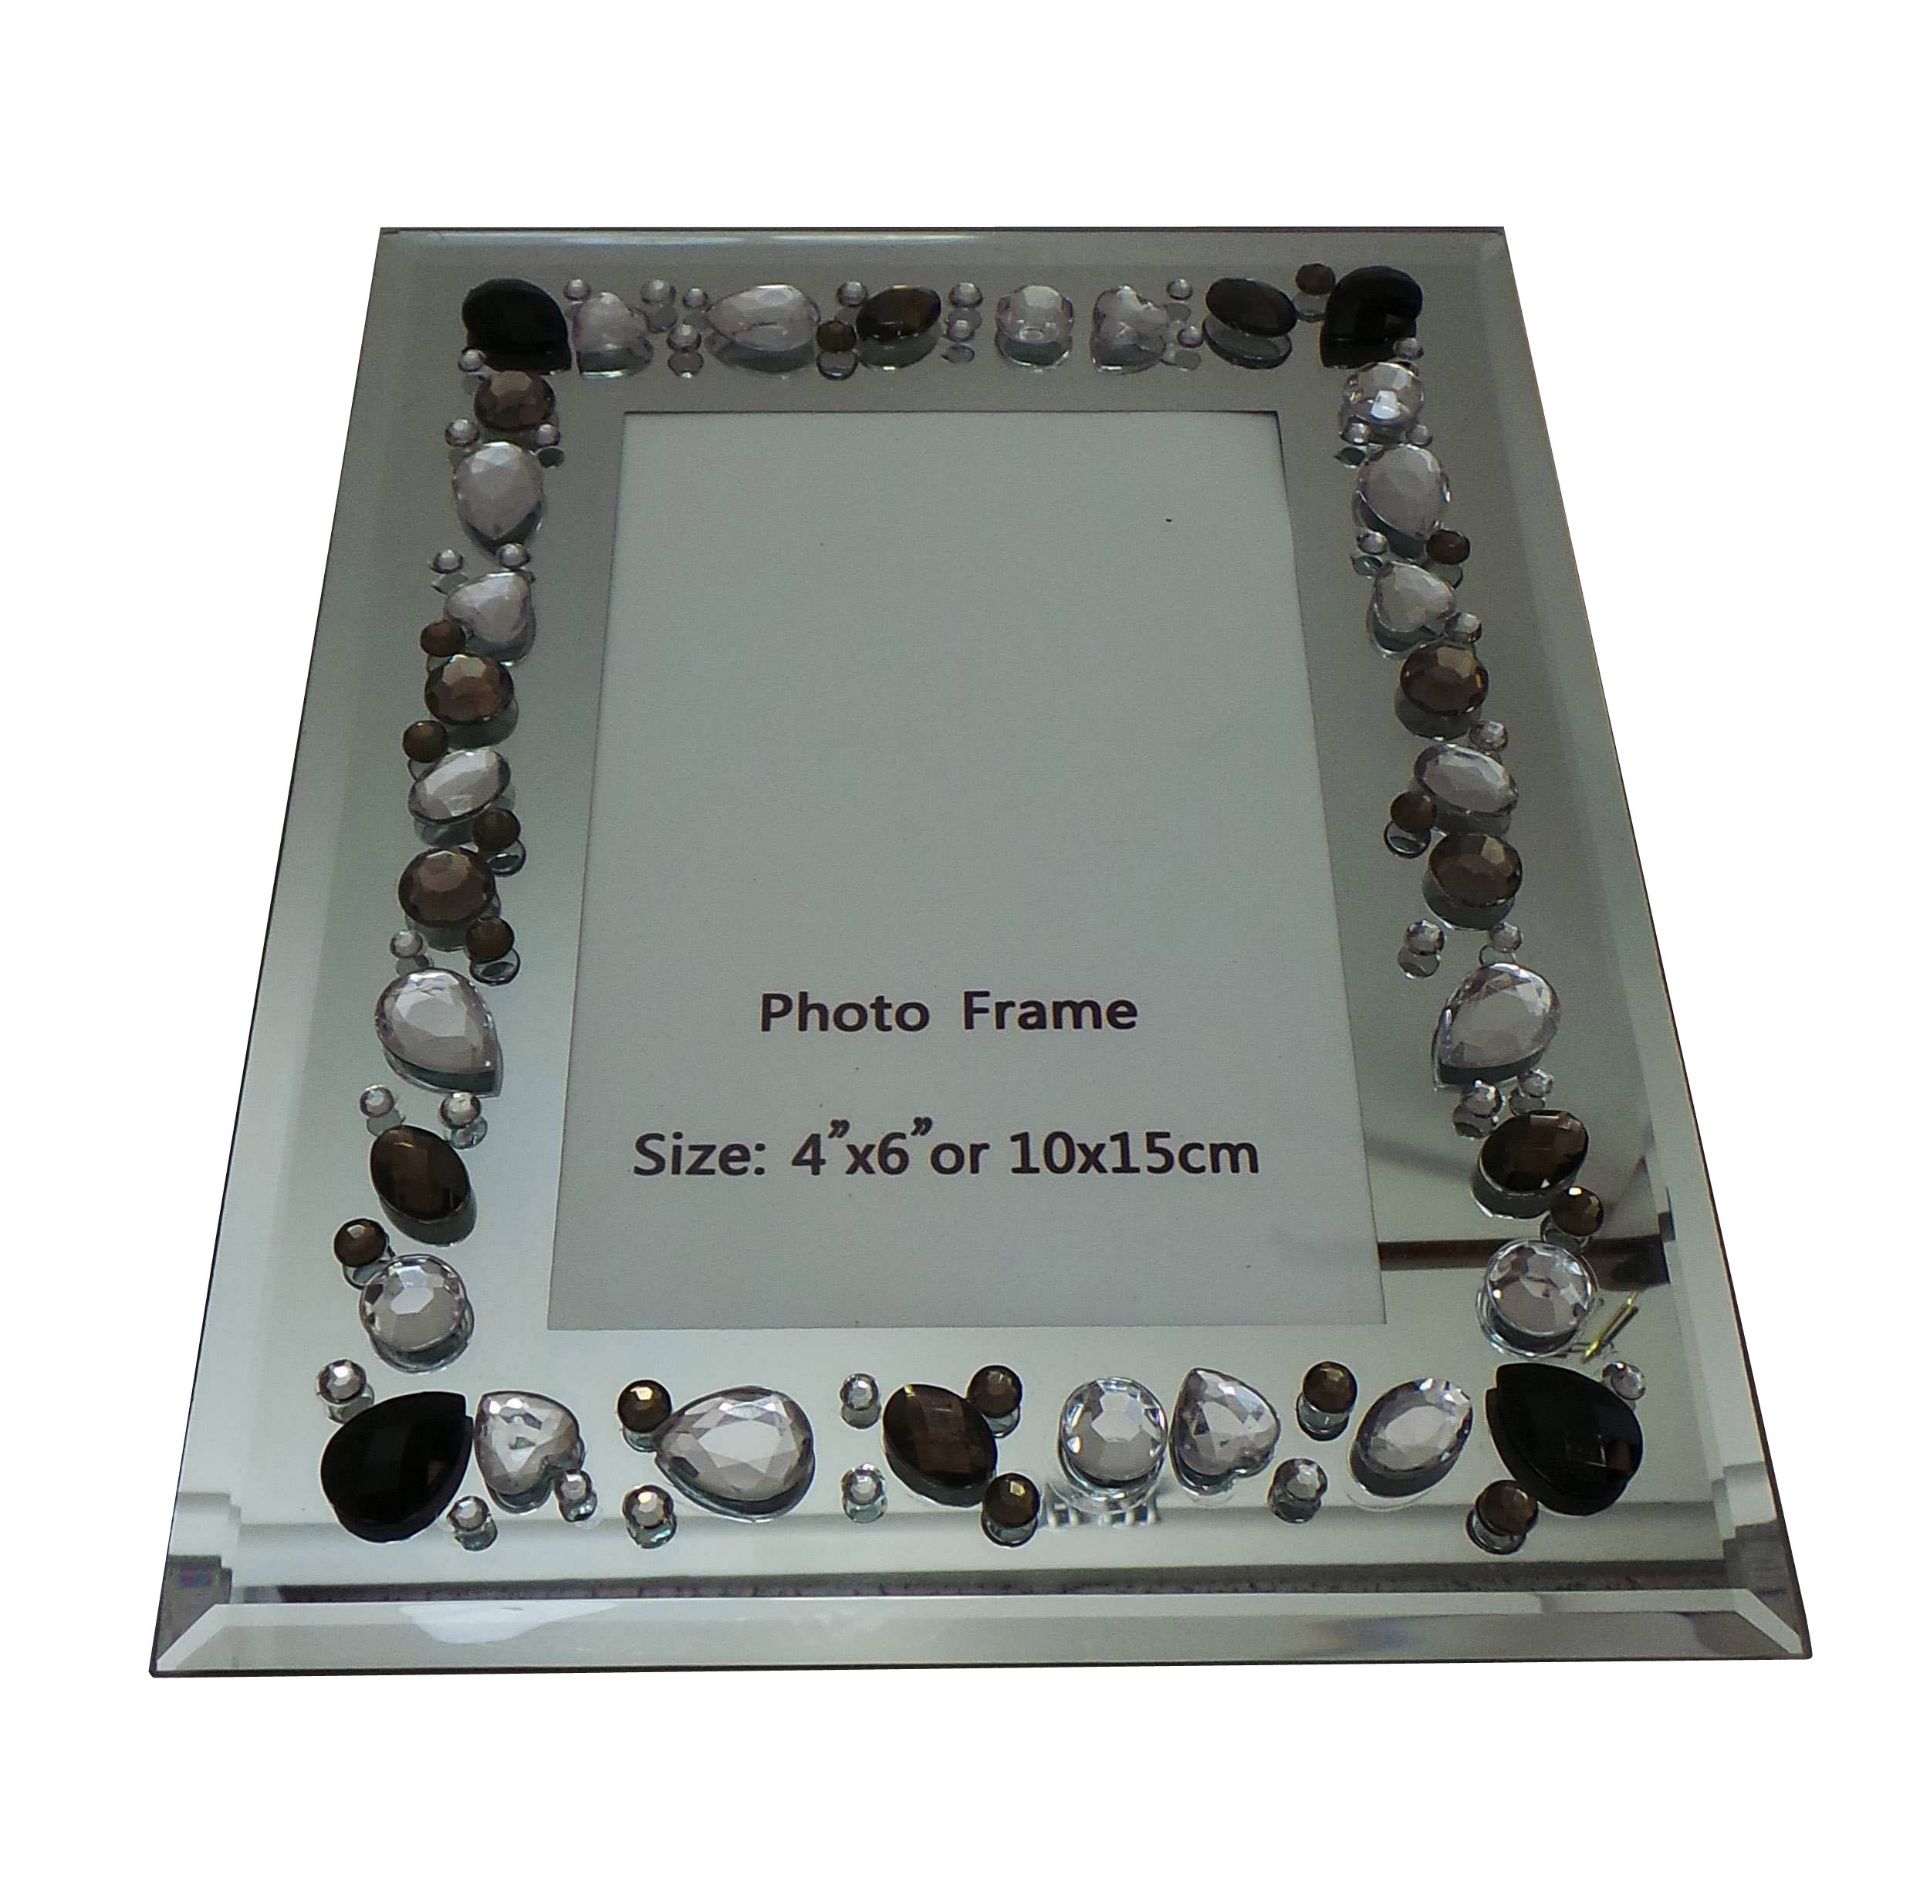 One Off Joblot of 20 4""x6"" Reflective Photo Frames With A Sequin Design 89-46